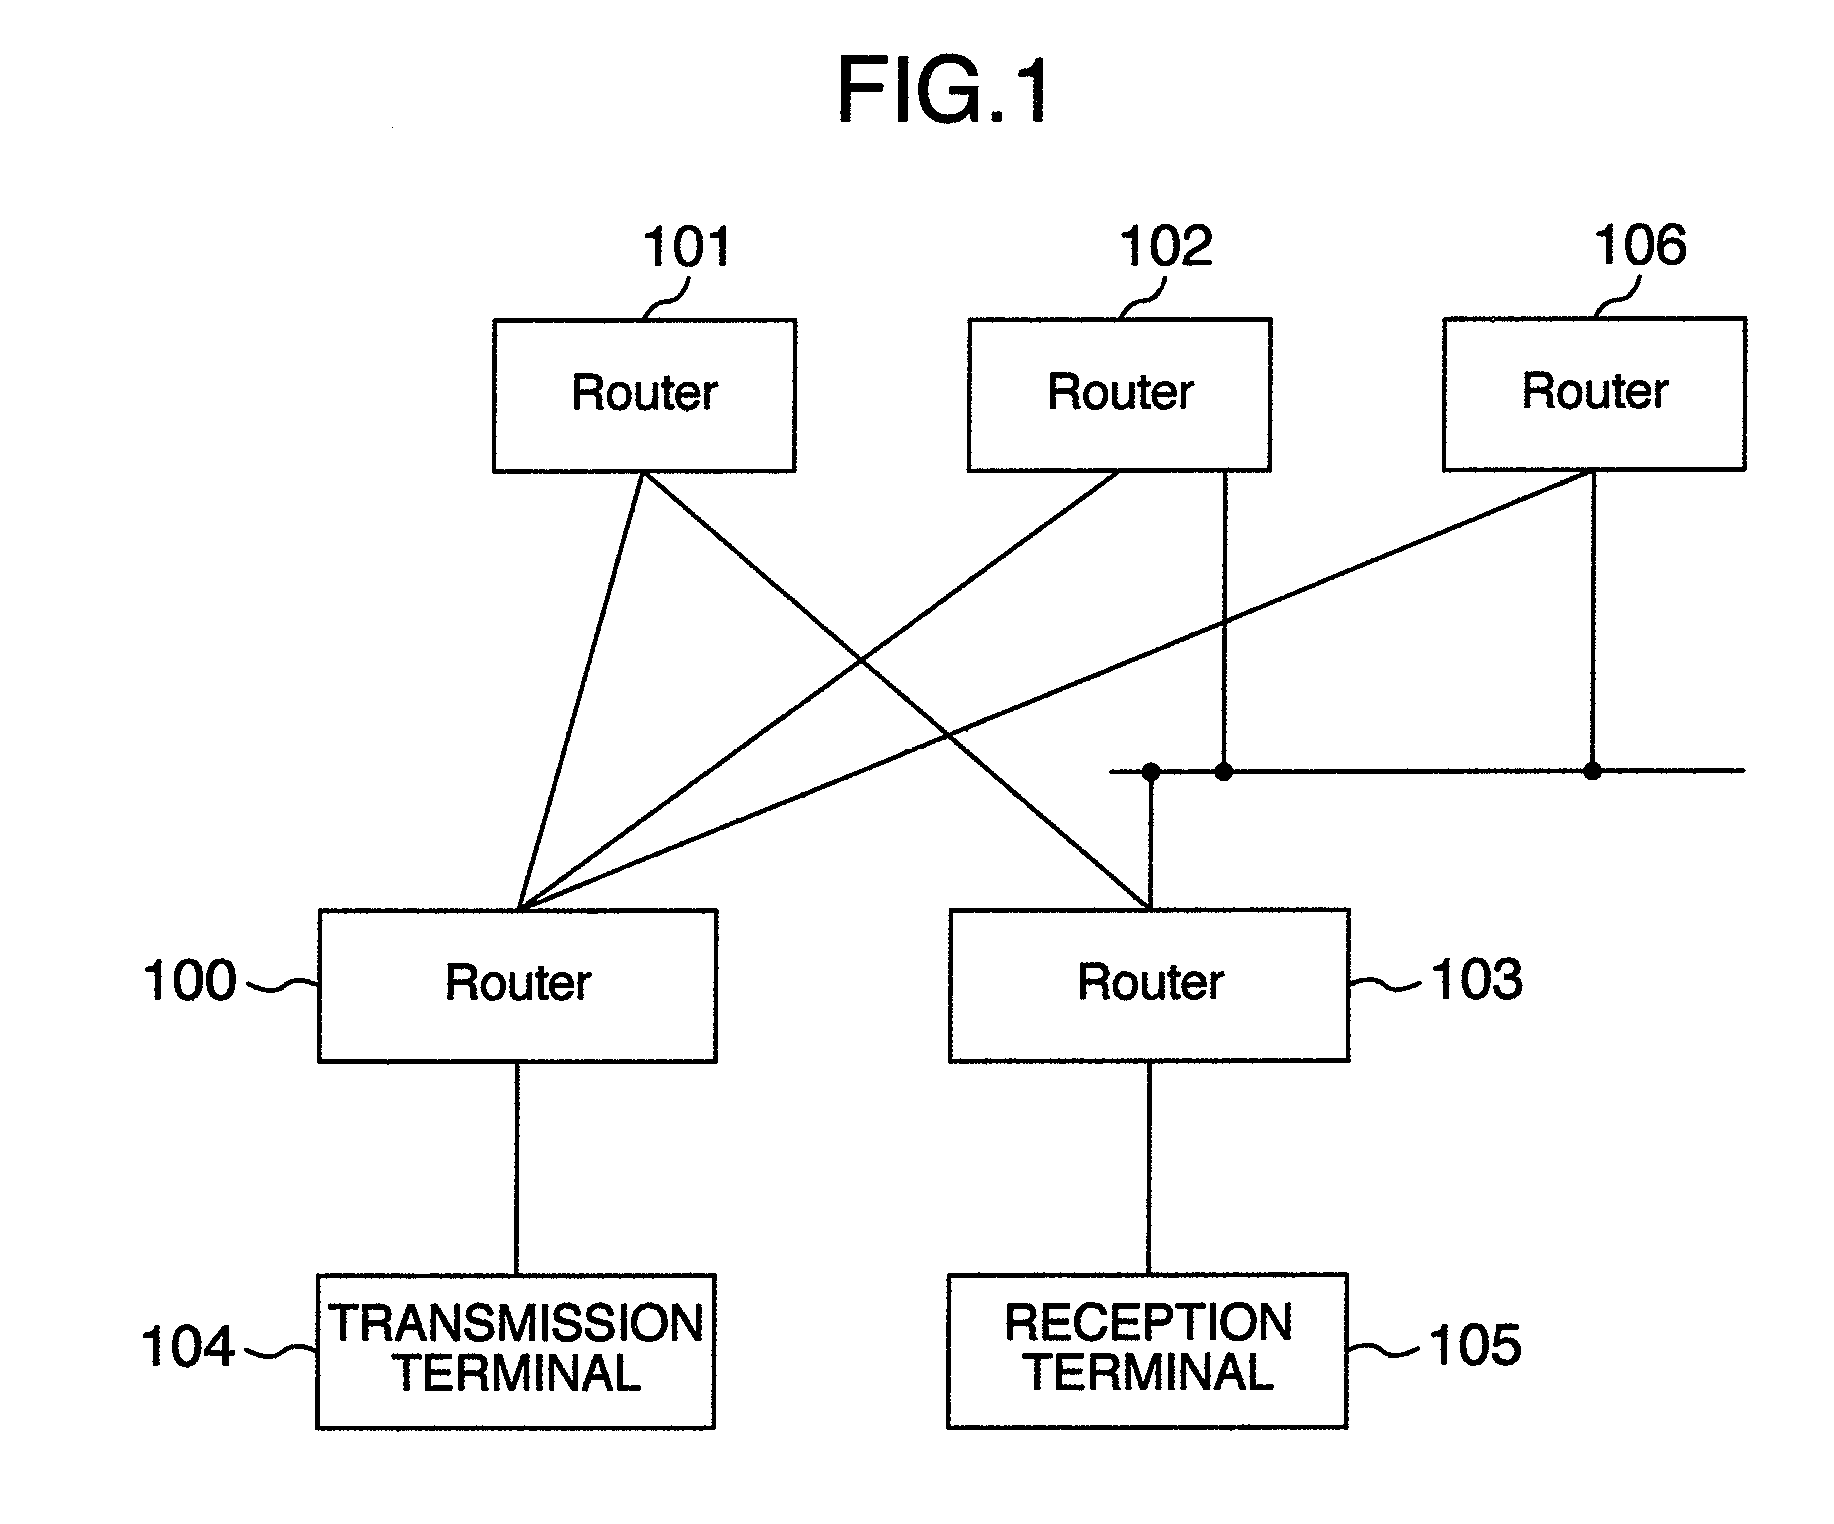 Multicast path building method and device